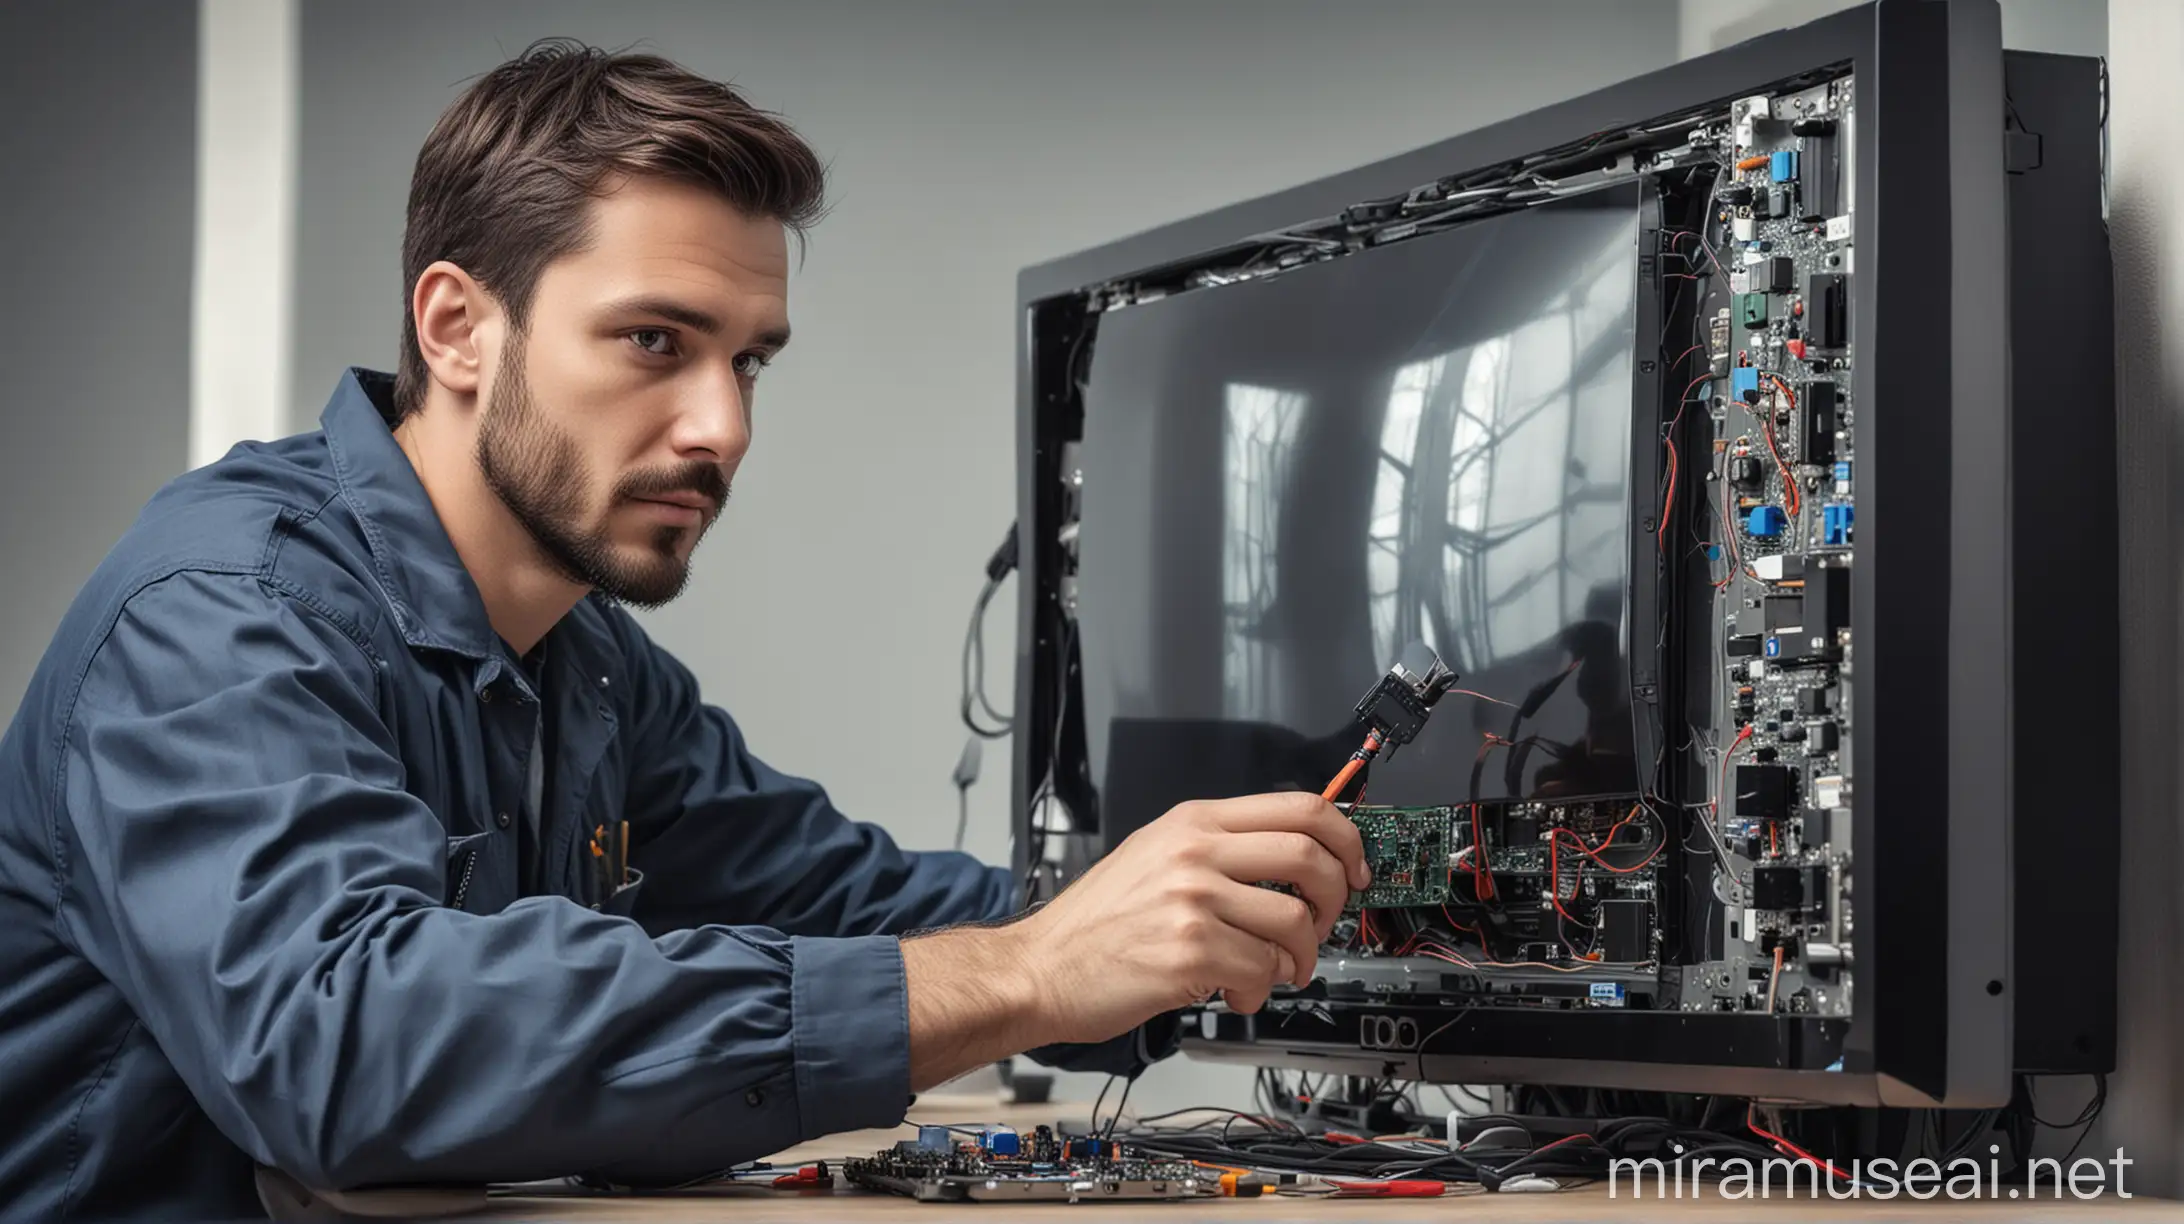 I want a banner image for an electronics company where a TV mechanic is repairing a smart LCD tv looking at it